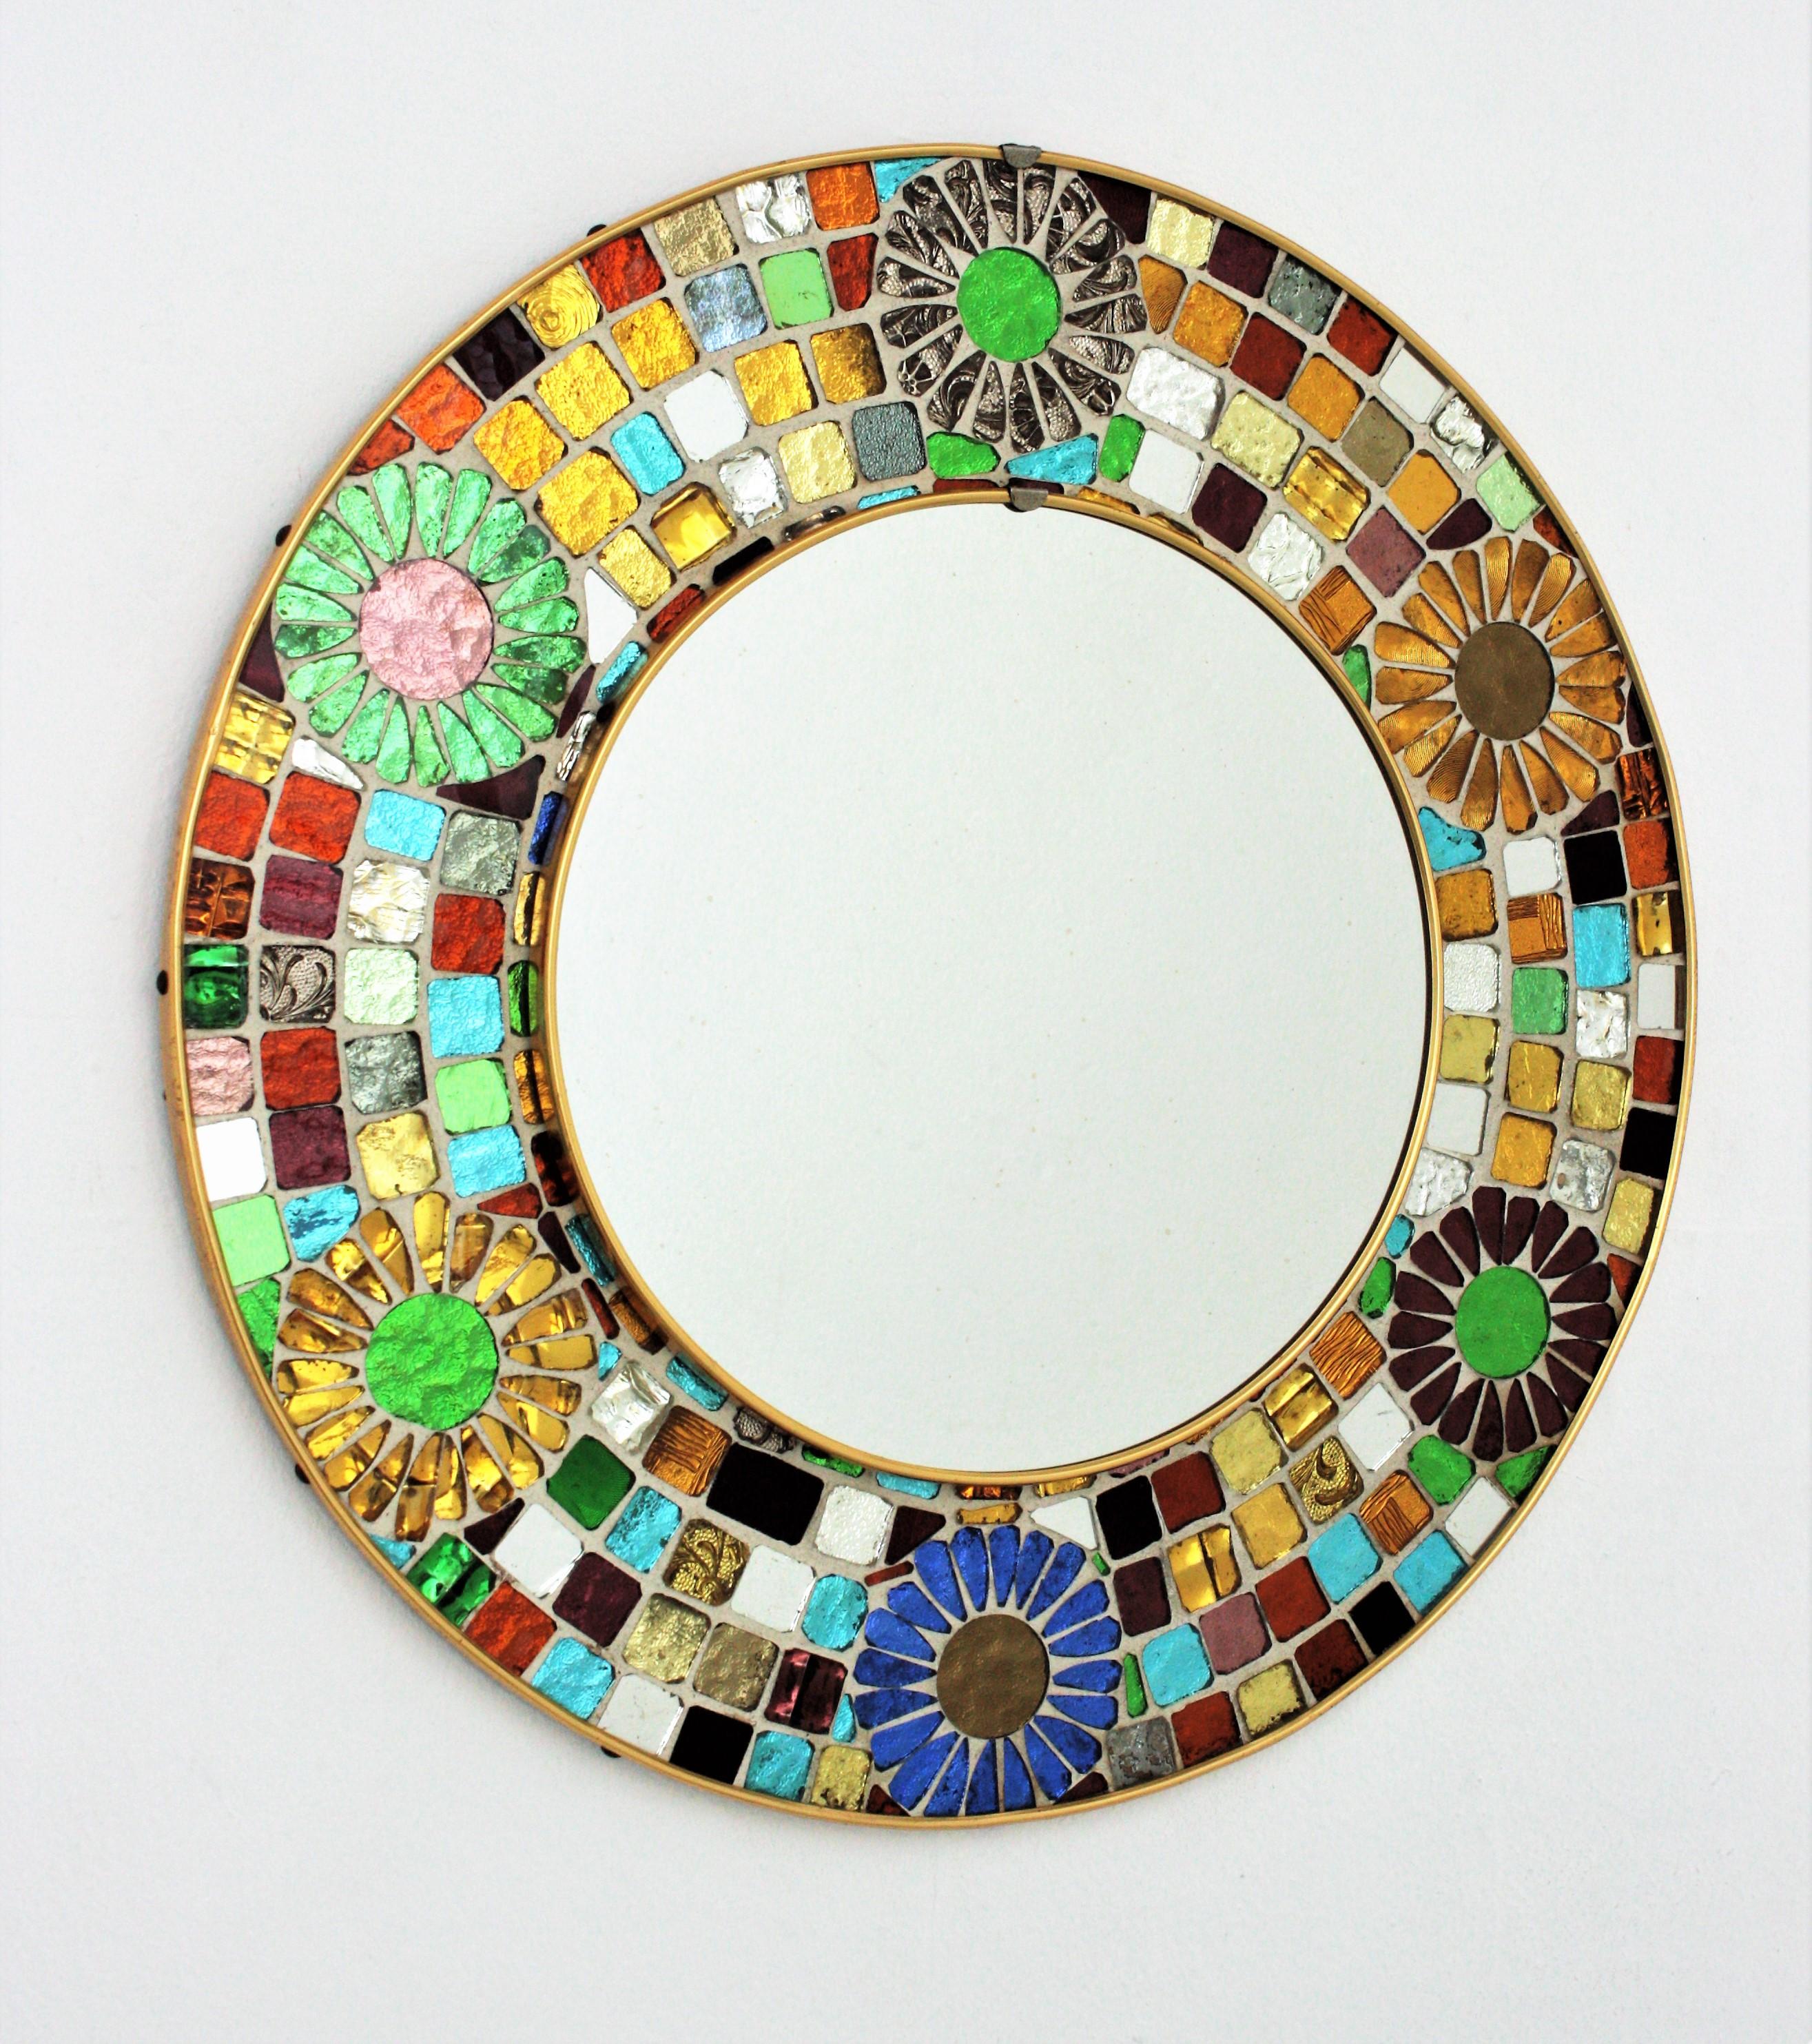 One of a kind Mid-Century Modern round colorful glass mosaic mirror with decorative flower details. Spain, 1960s.
This eye-catching mirror features a central round glass surrounded by a colorful mosaic frame made of hand-cut small pieces of glass in